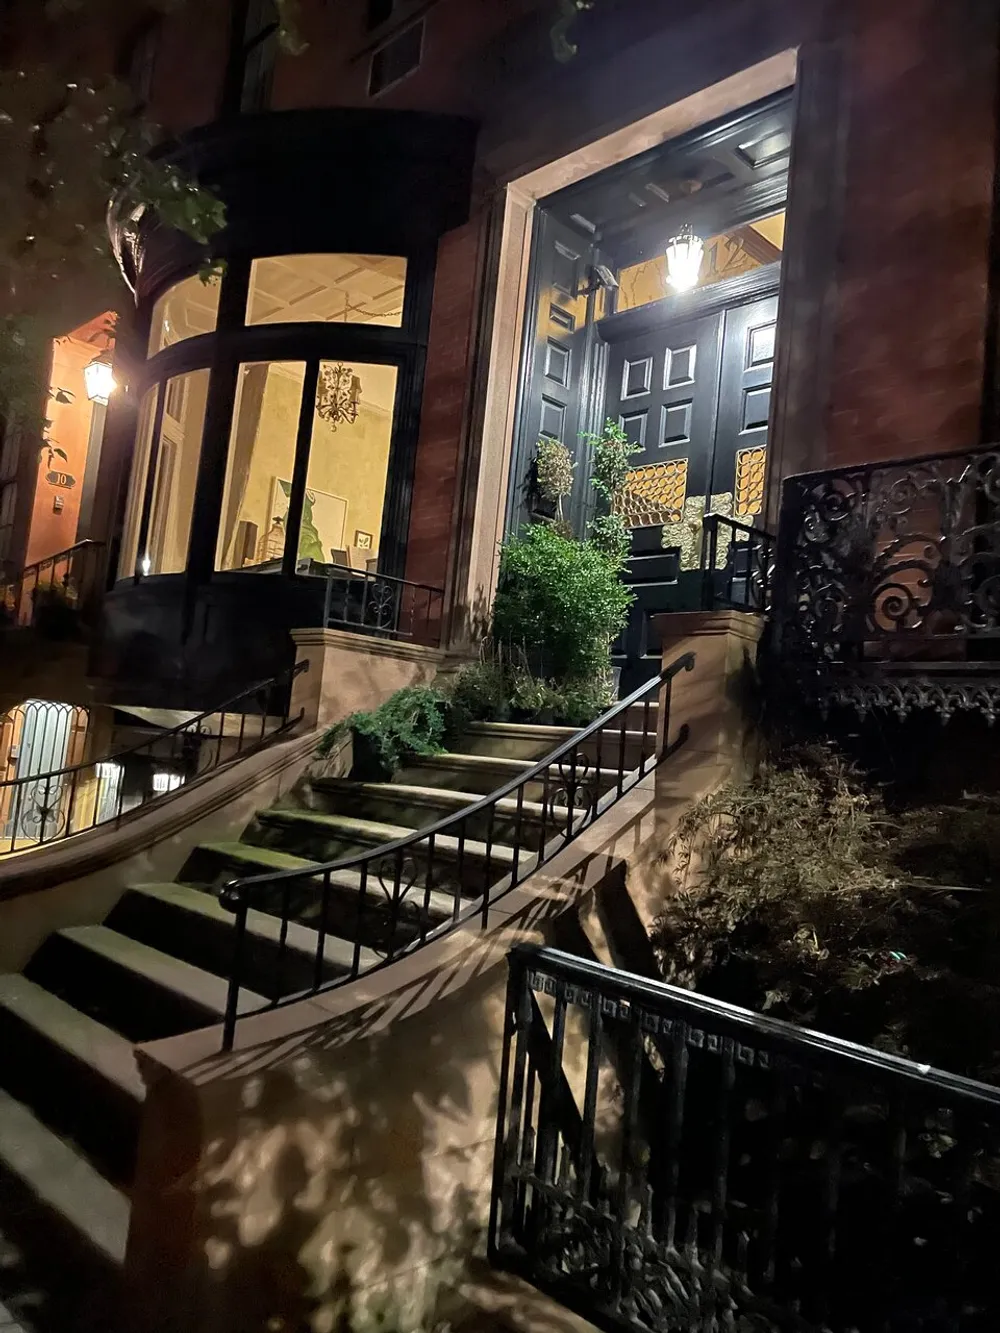 The image shows a well-lit entrance to a traditional brownstone at nighttime with steps leading up to a dark wooden door framed by decorative elements and surrounded by potted plants